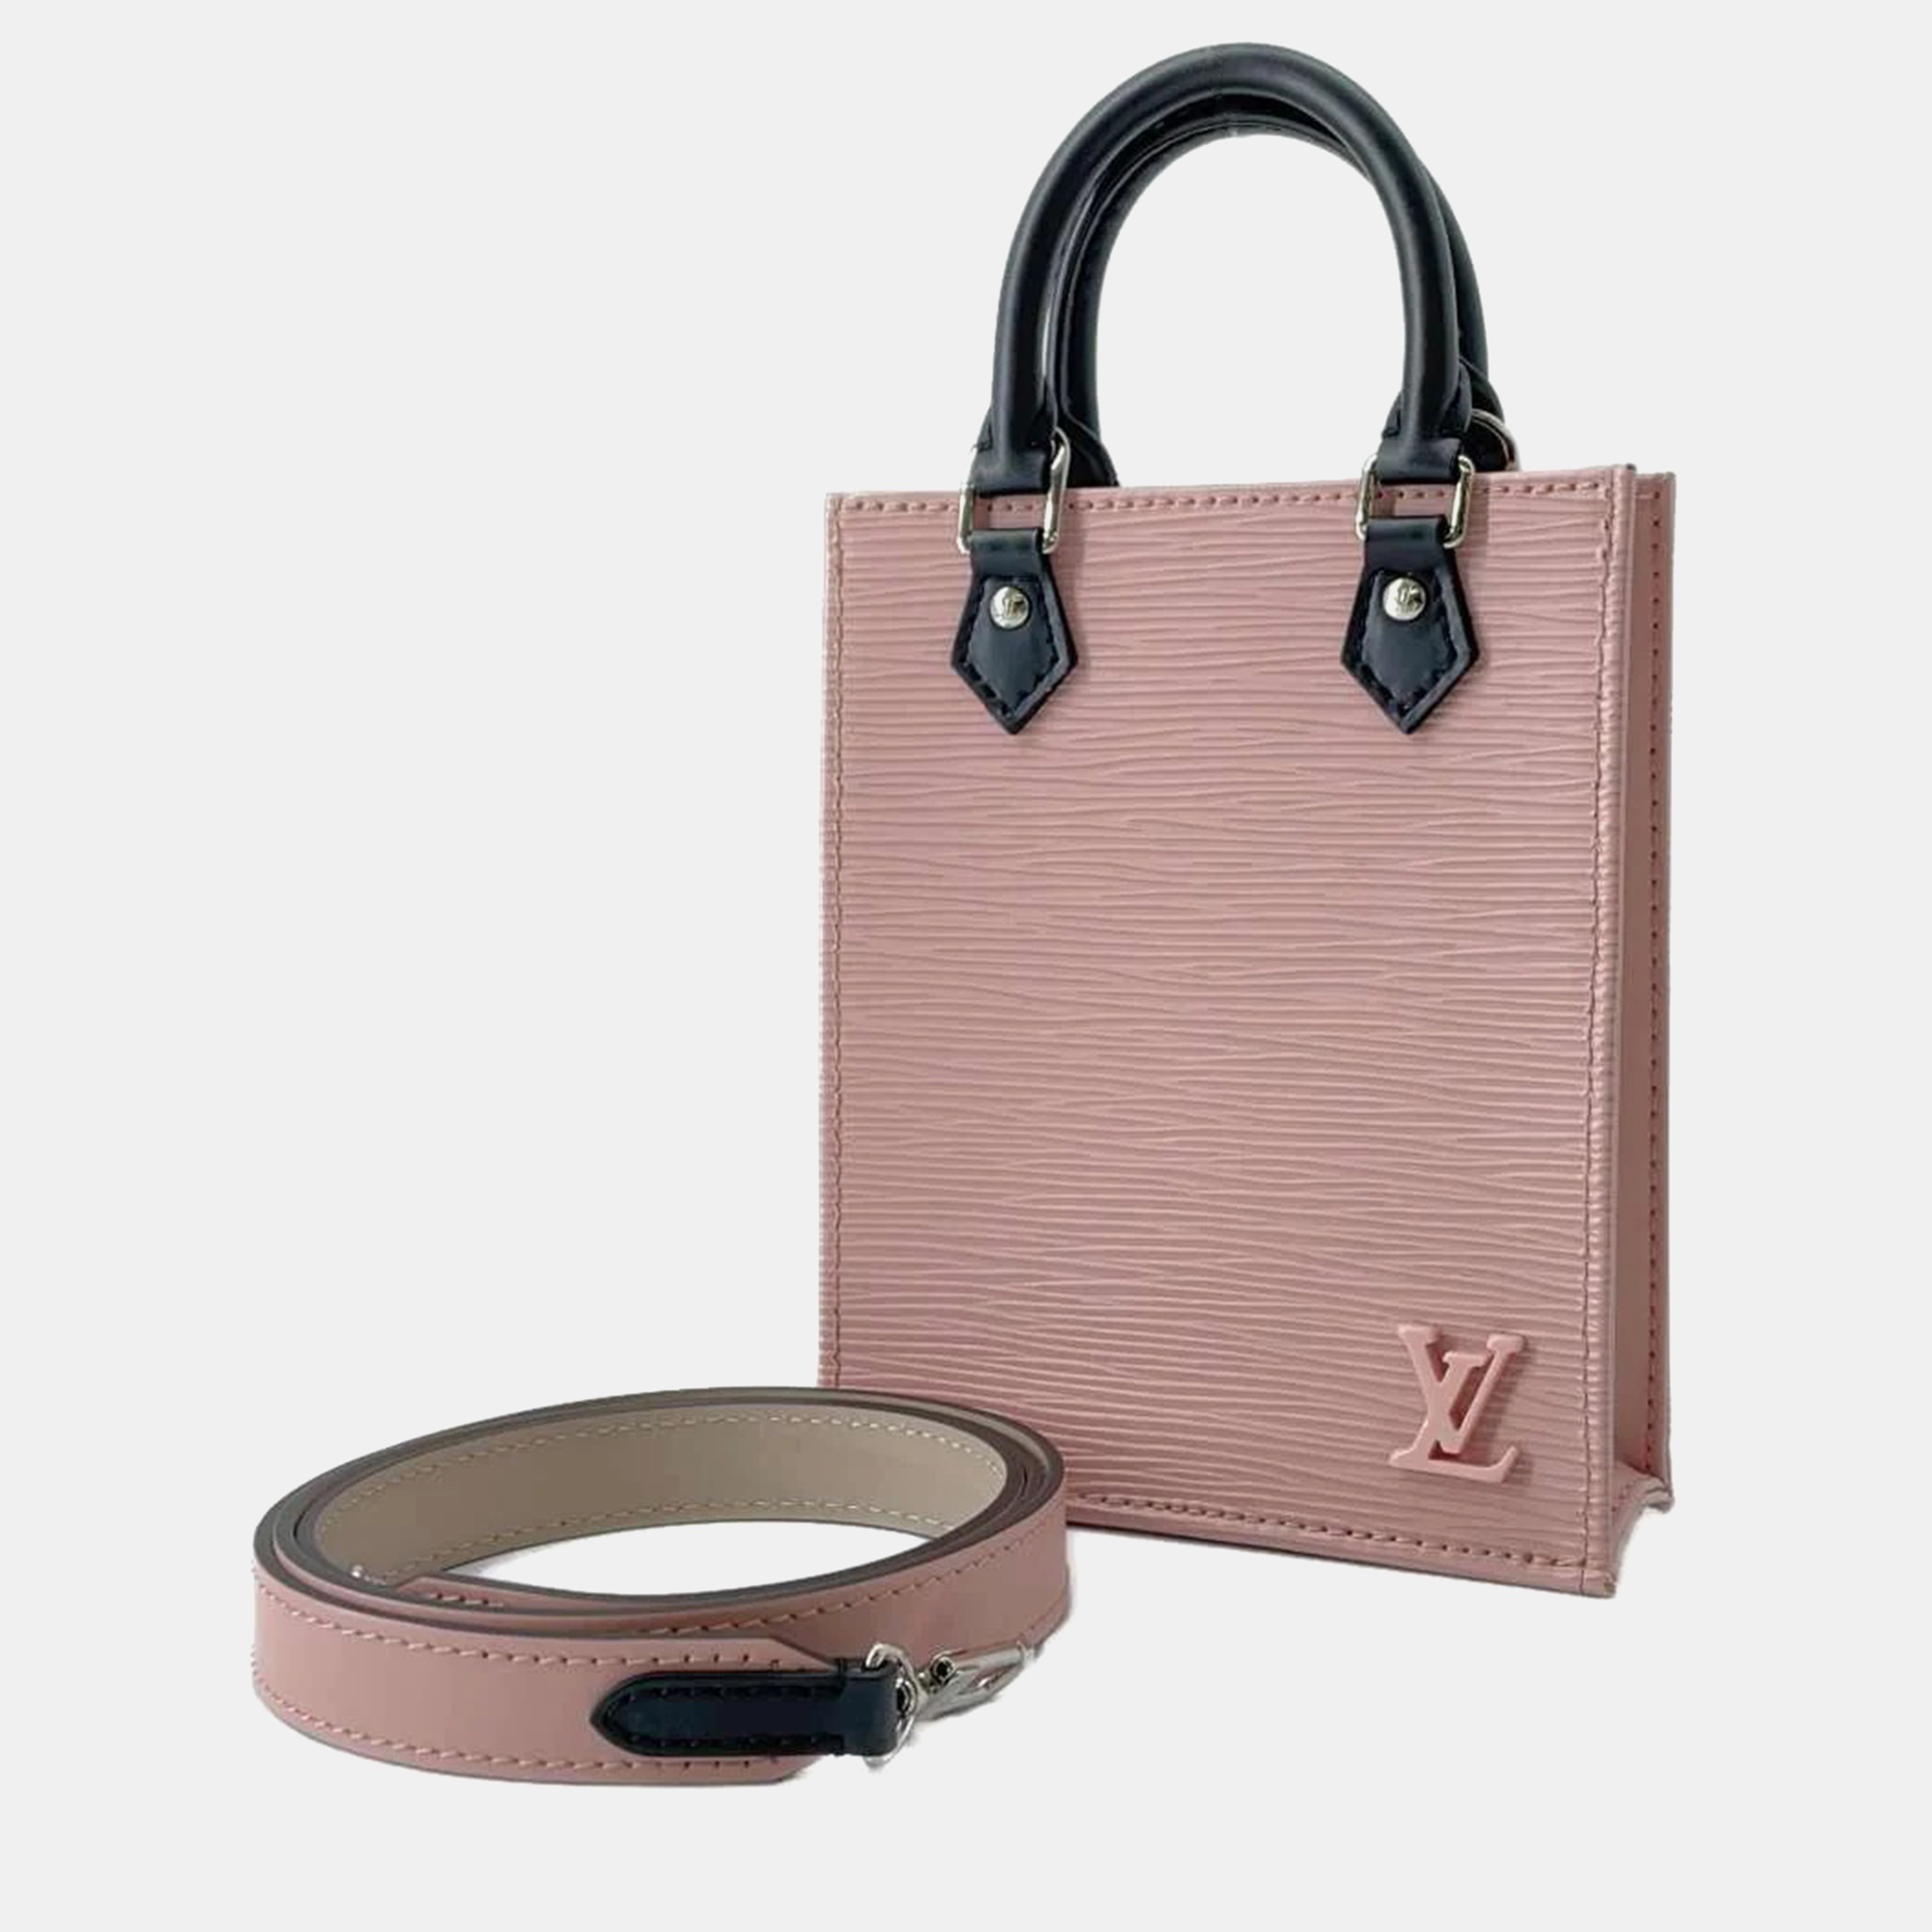 Indulge in timeless elegance with this Louis Vuitton bag meticulously crafted to perfection. Its exquisite details and luxurious materials make it a statement piece for any sophisticated ensemble.